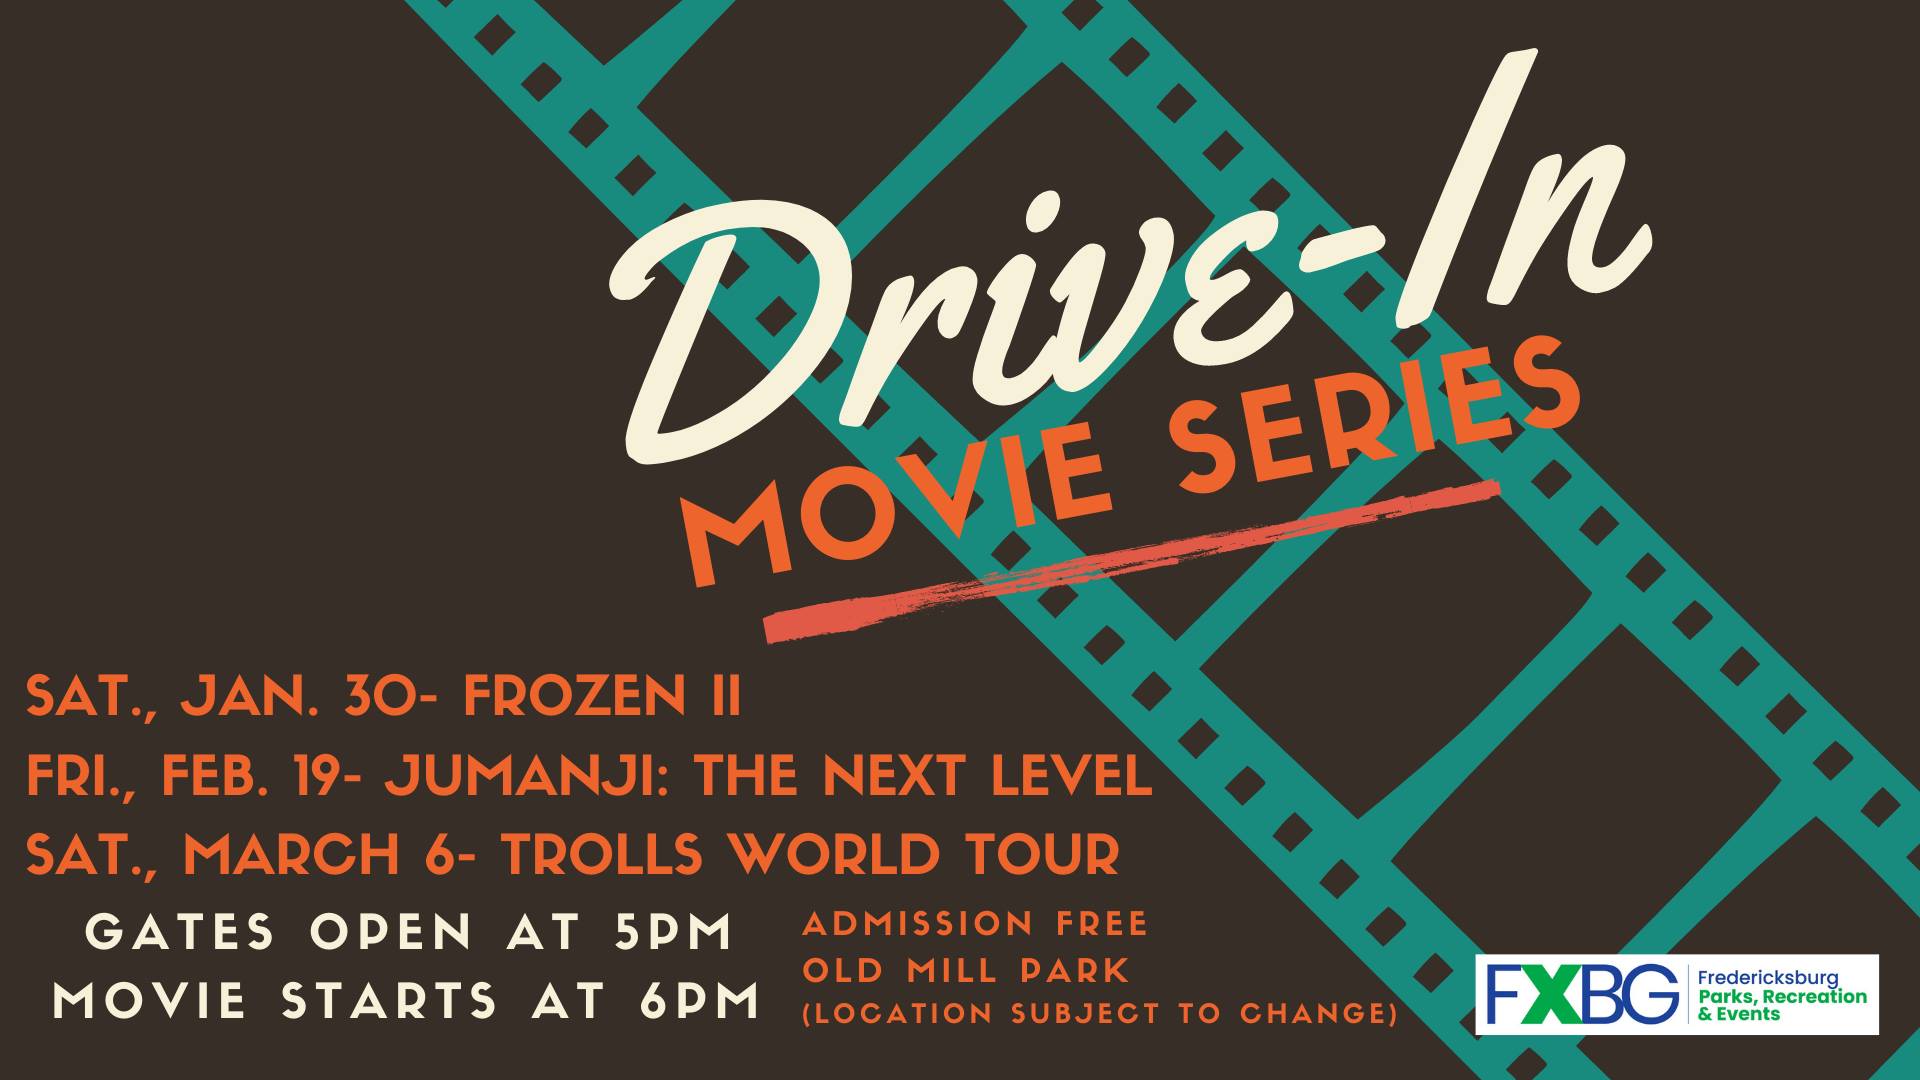 33 Top Images Drive In Movie Nyc / Drive-in movies make a comeback | Melton & Moorabool